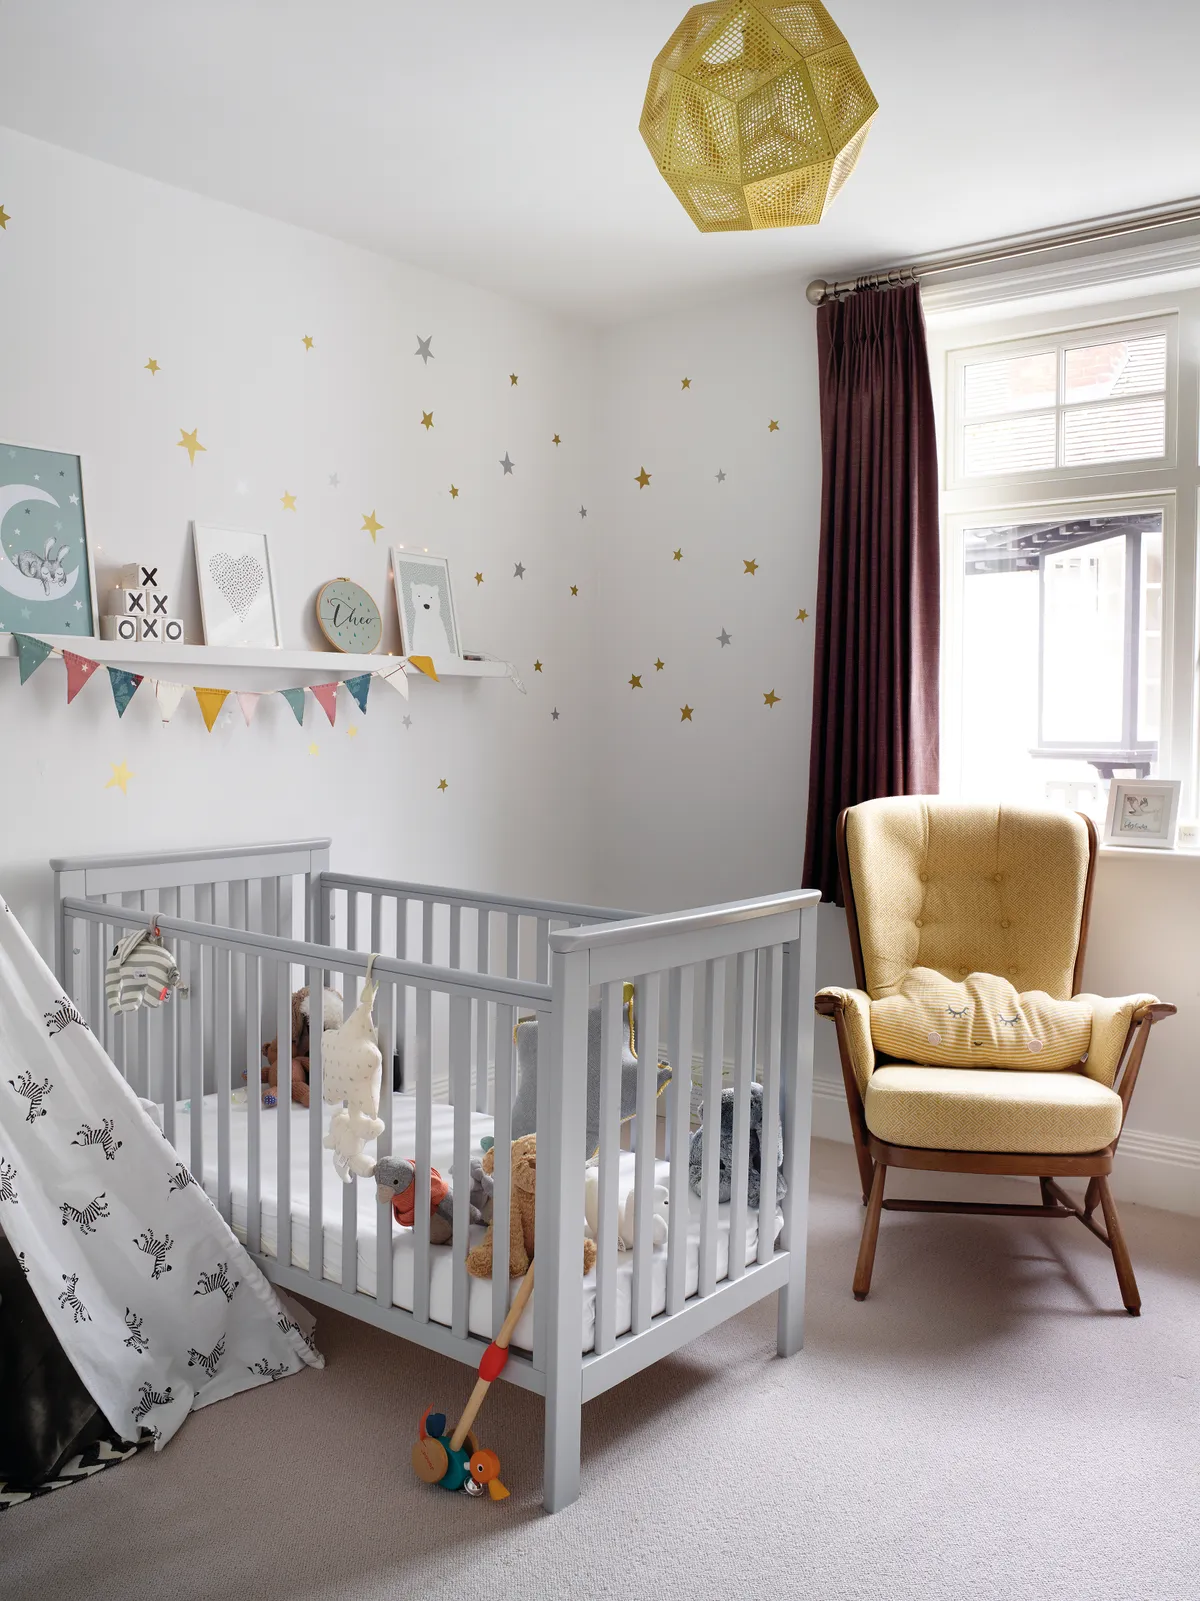 ‘I didn’t want to spend a lot on Theo’s room as he’ll grow out of it. I used decals on a neutral wall and added prints, bunting and fairy lights for texture and interest’ says Sarah